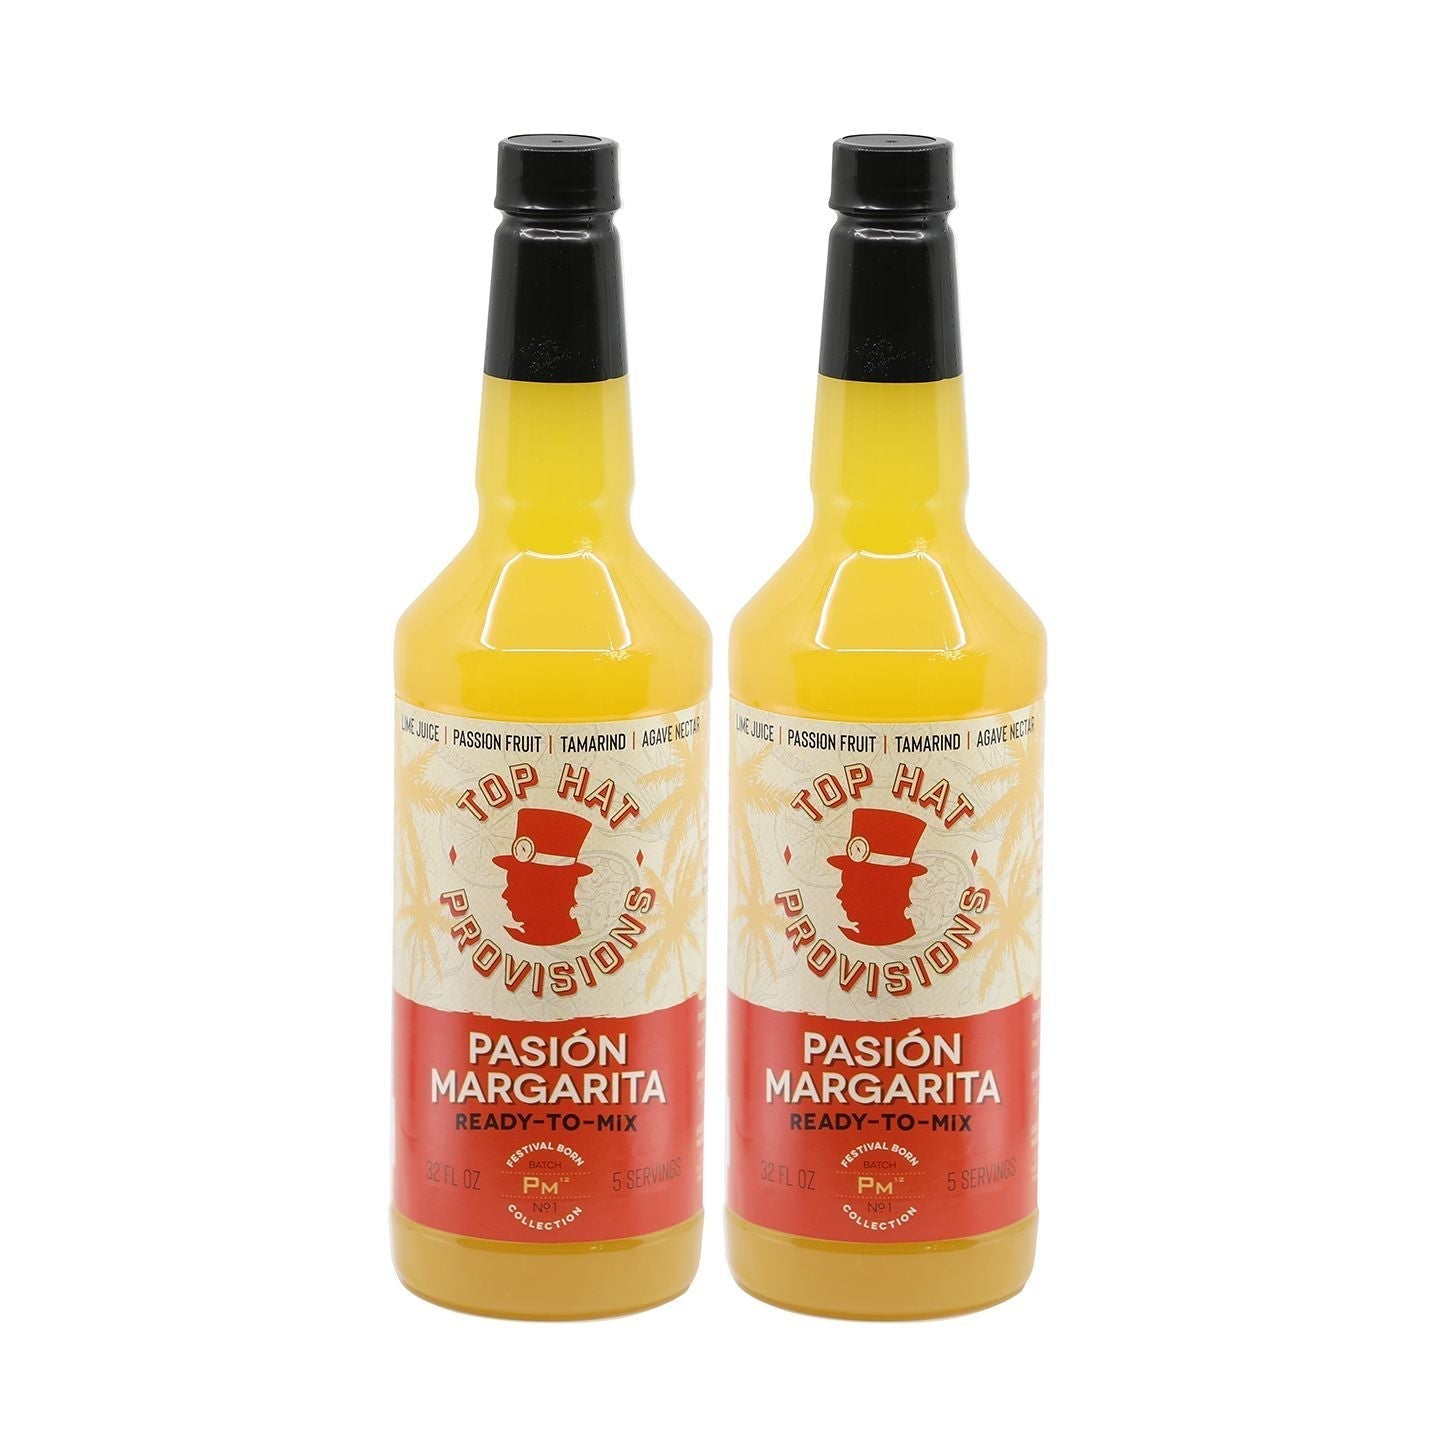 Top Hat Passion Fruit Margarita Mix (Made with real passion fruit & agave nectar) - 12x32oz case - Groove Rabbit